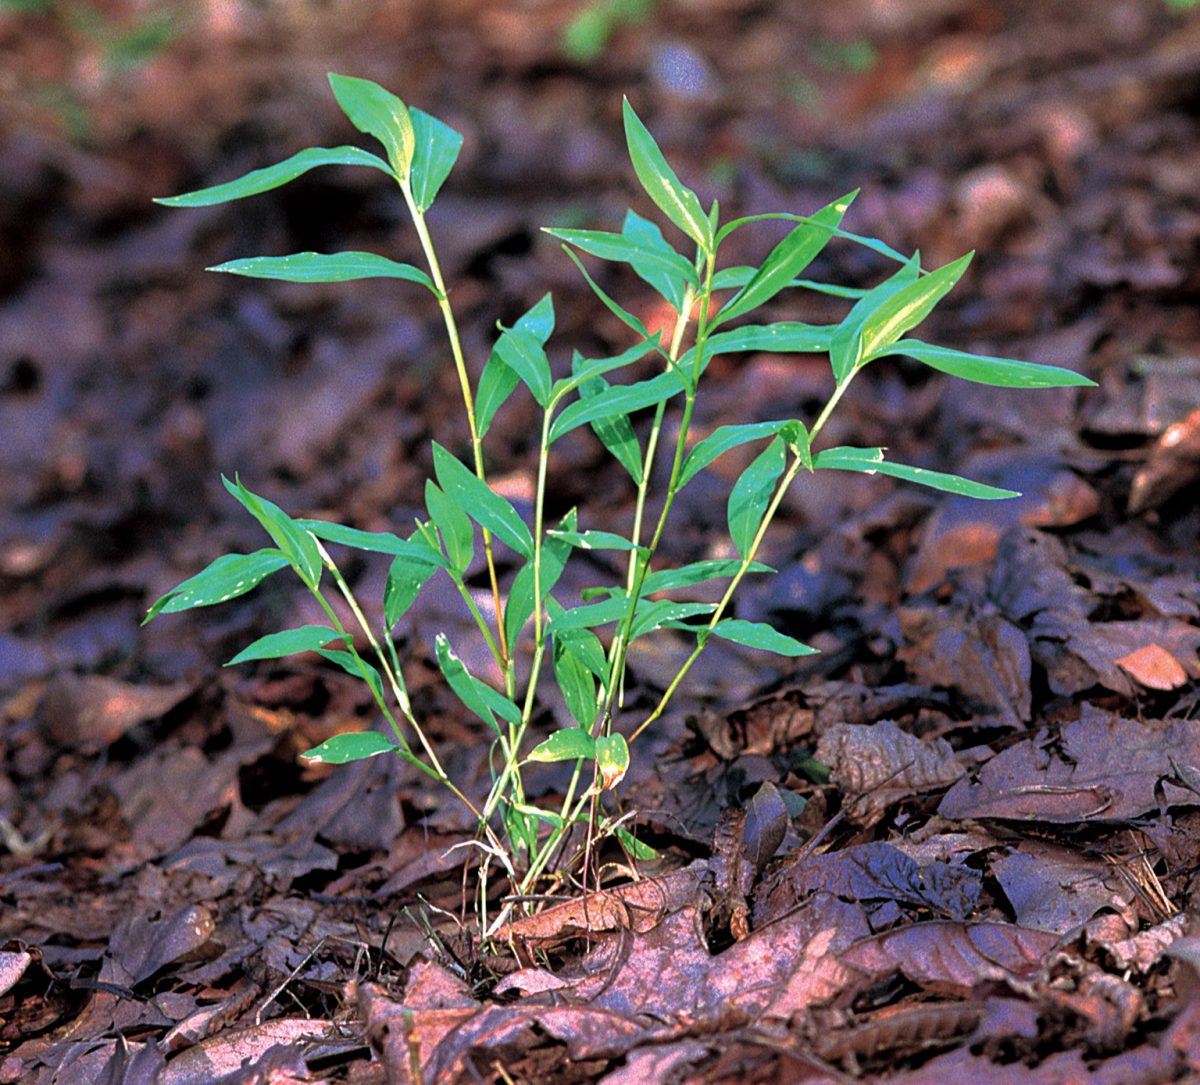 Japanese stiltgrass was first listed as an invasive species in 1919.